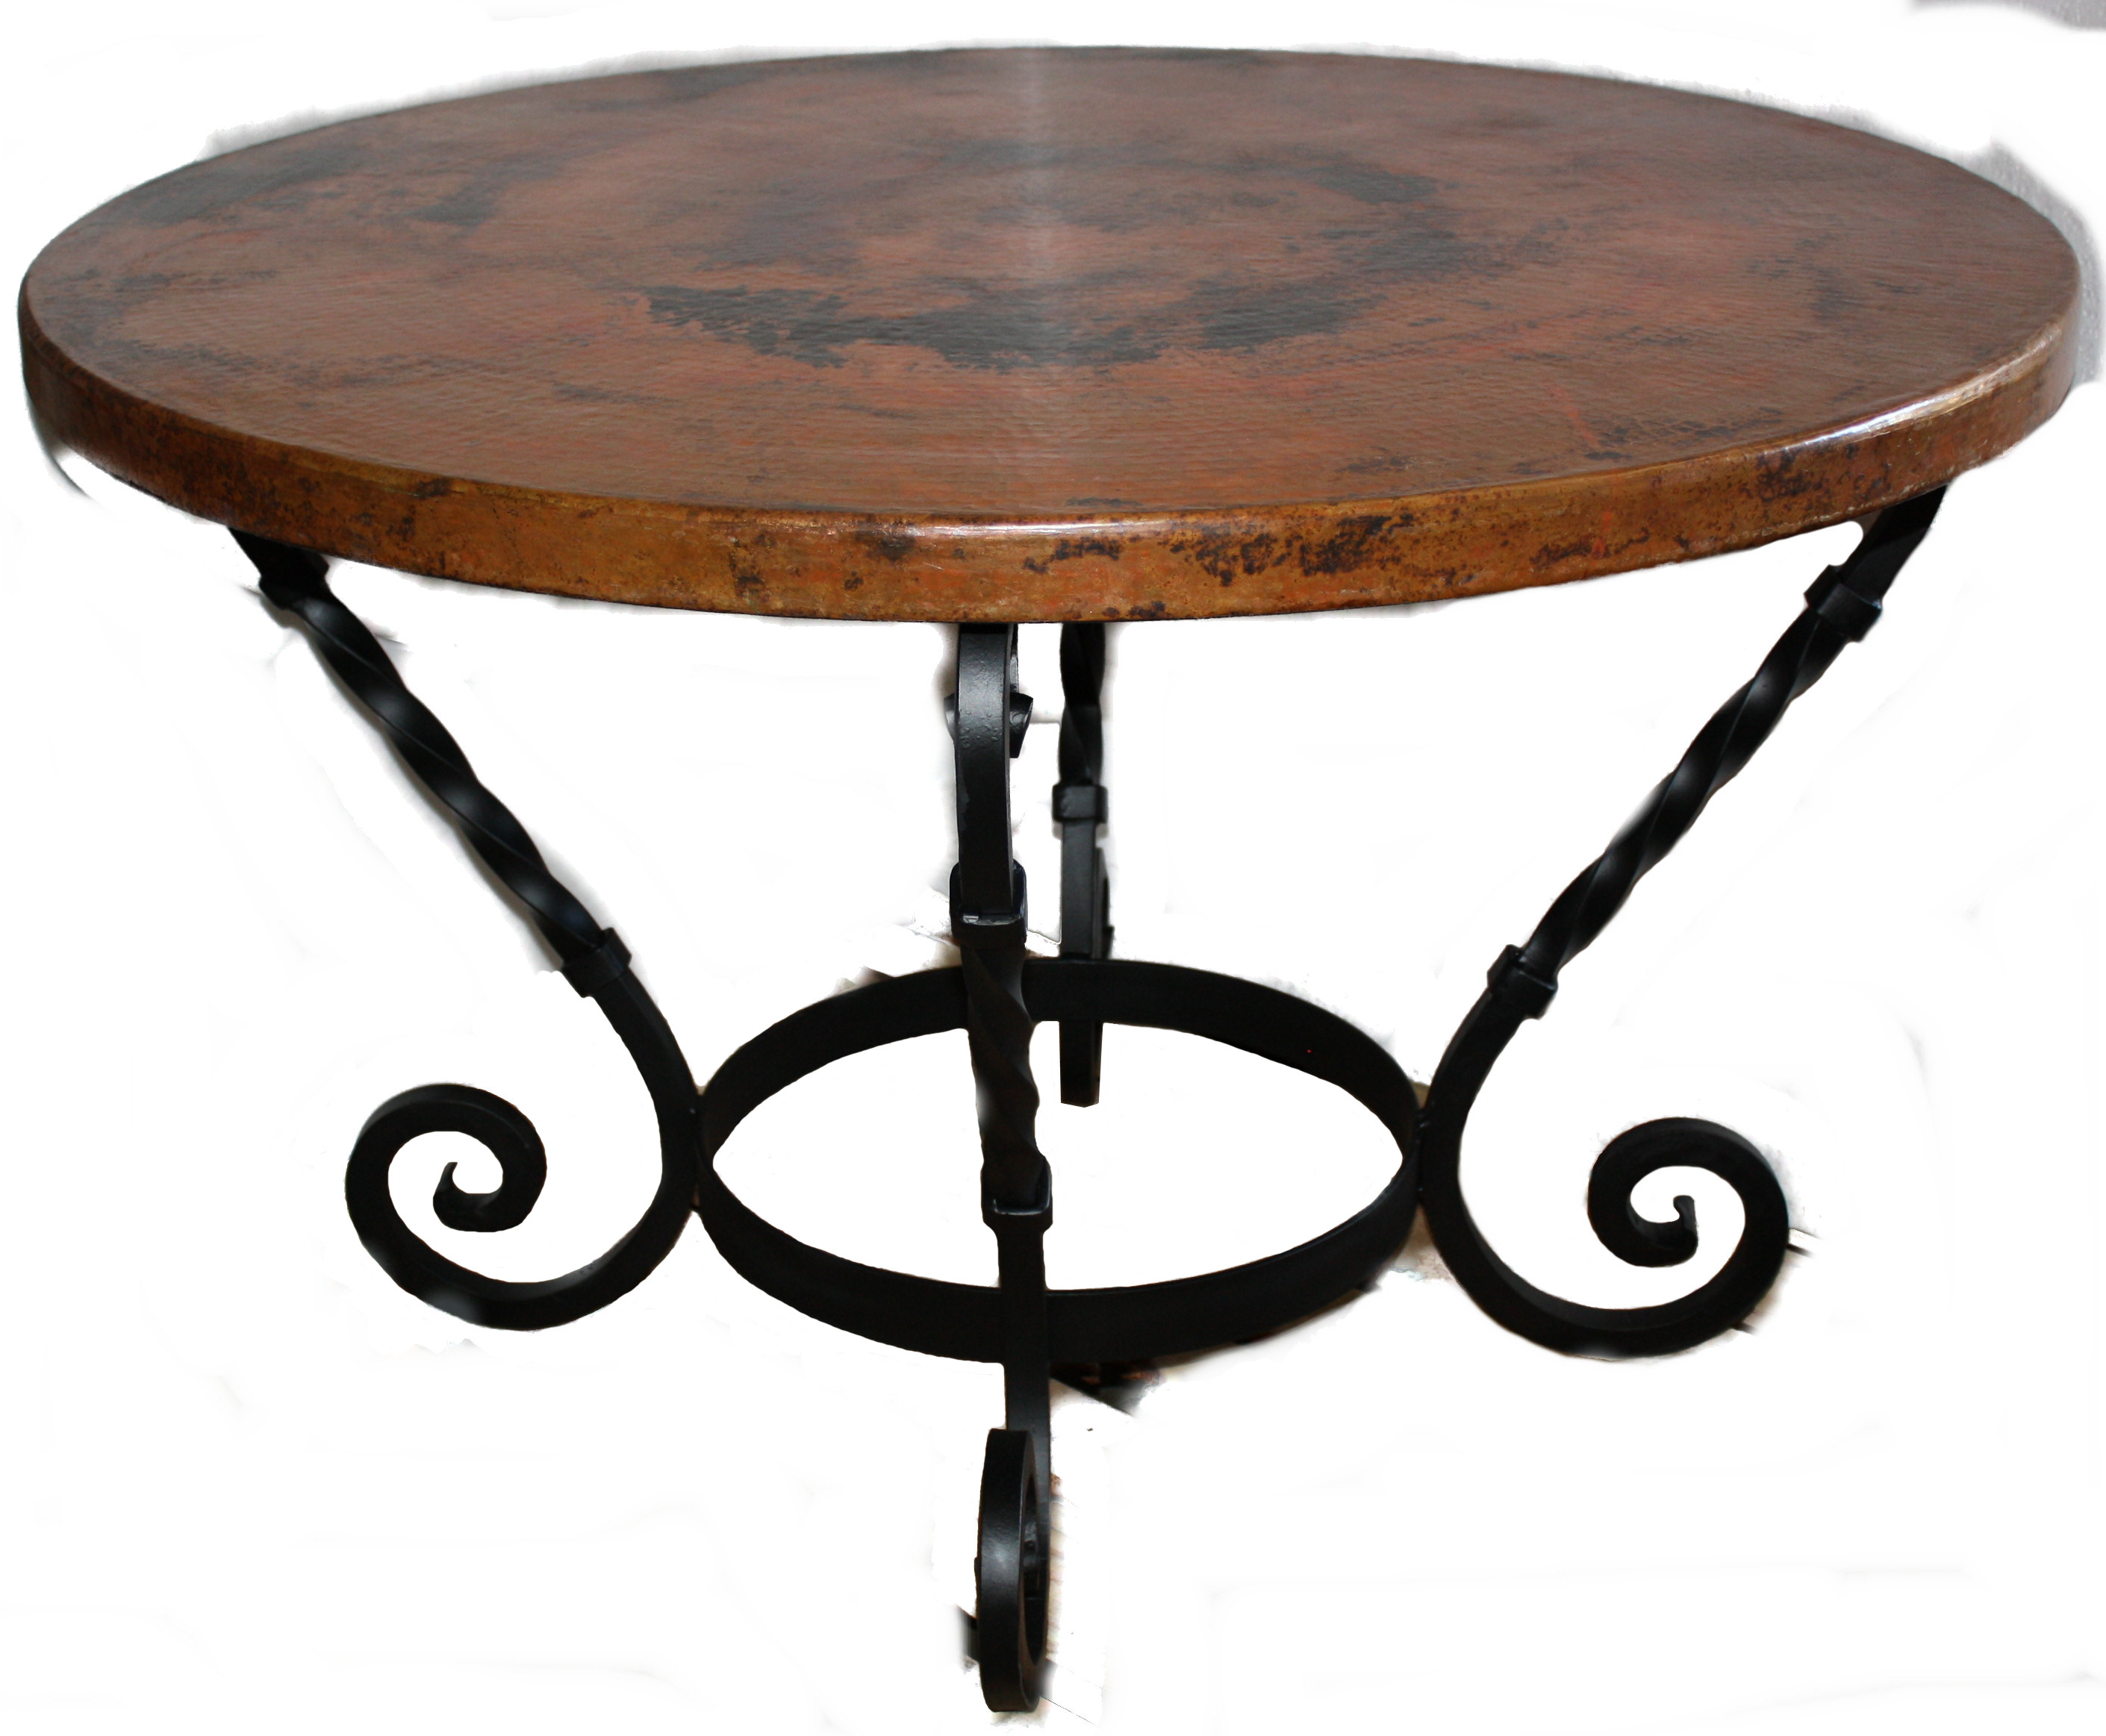 Big Round Hammered Copper Table